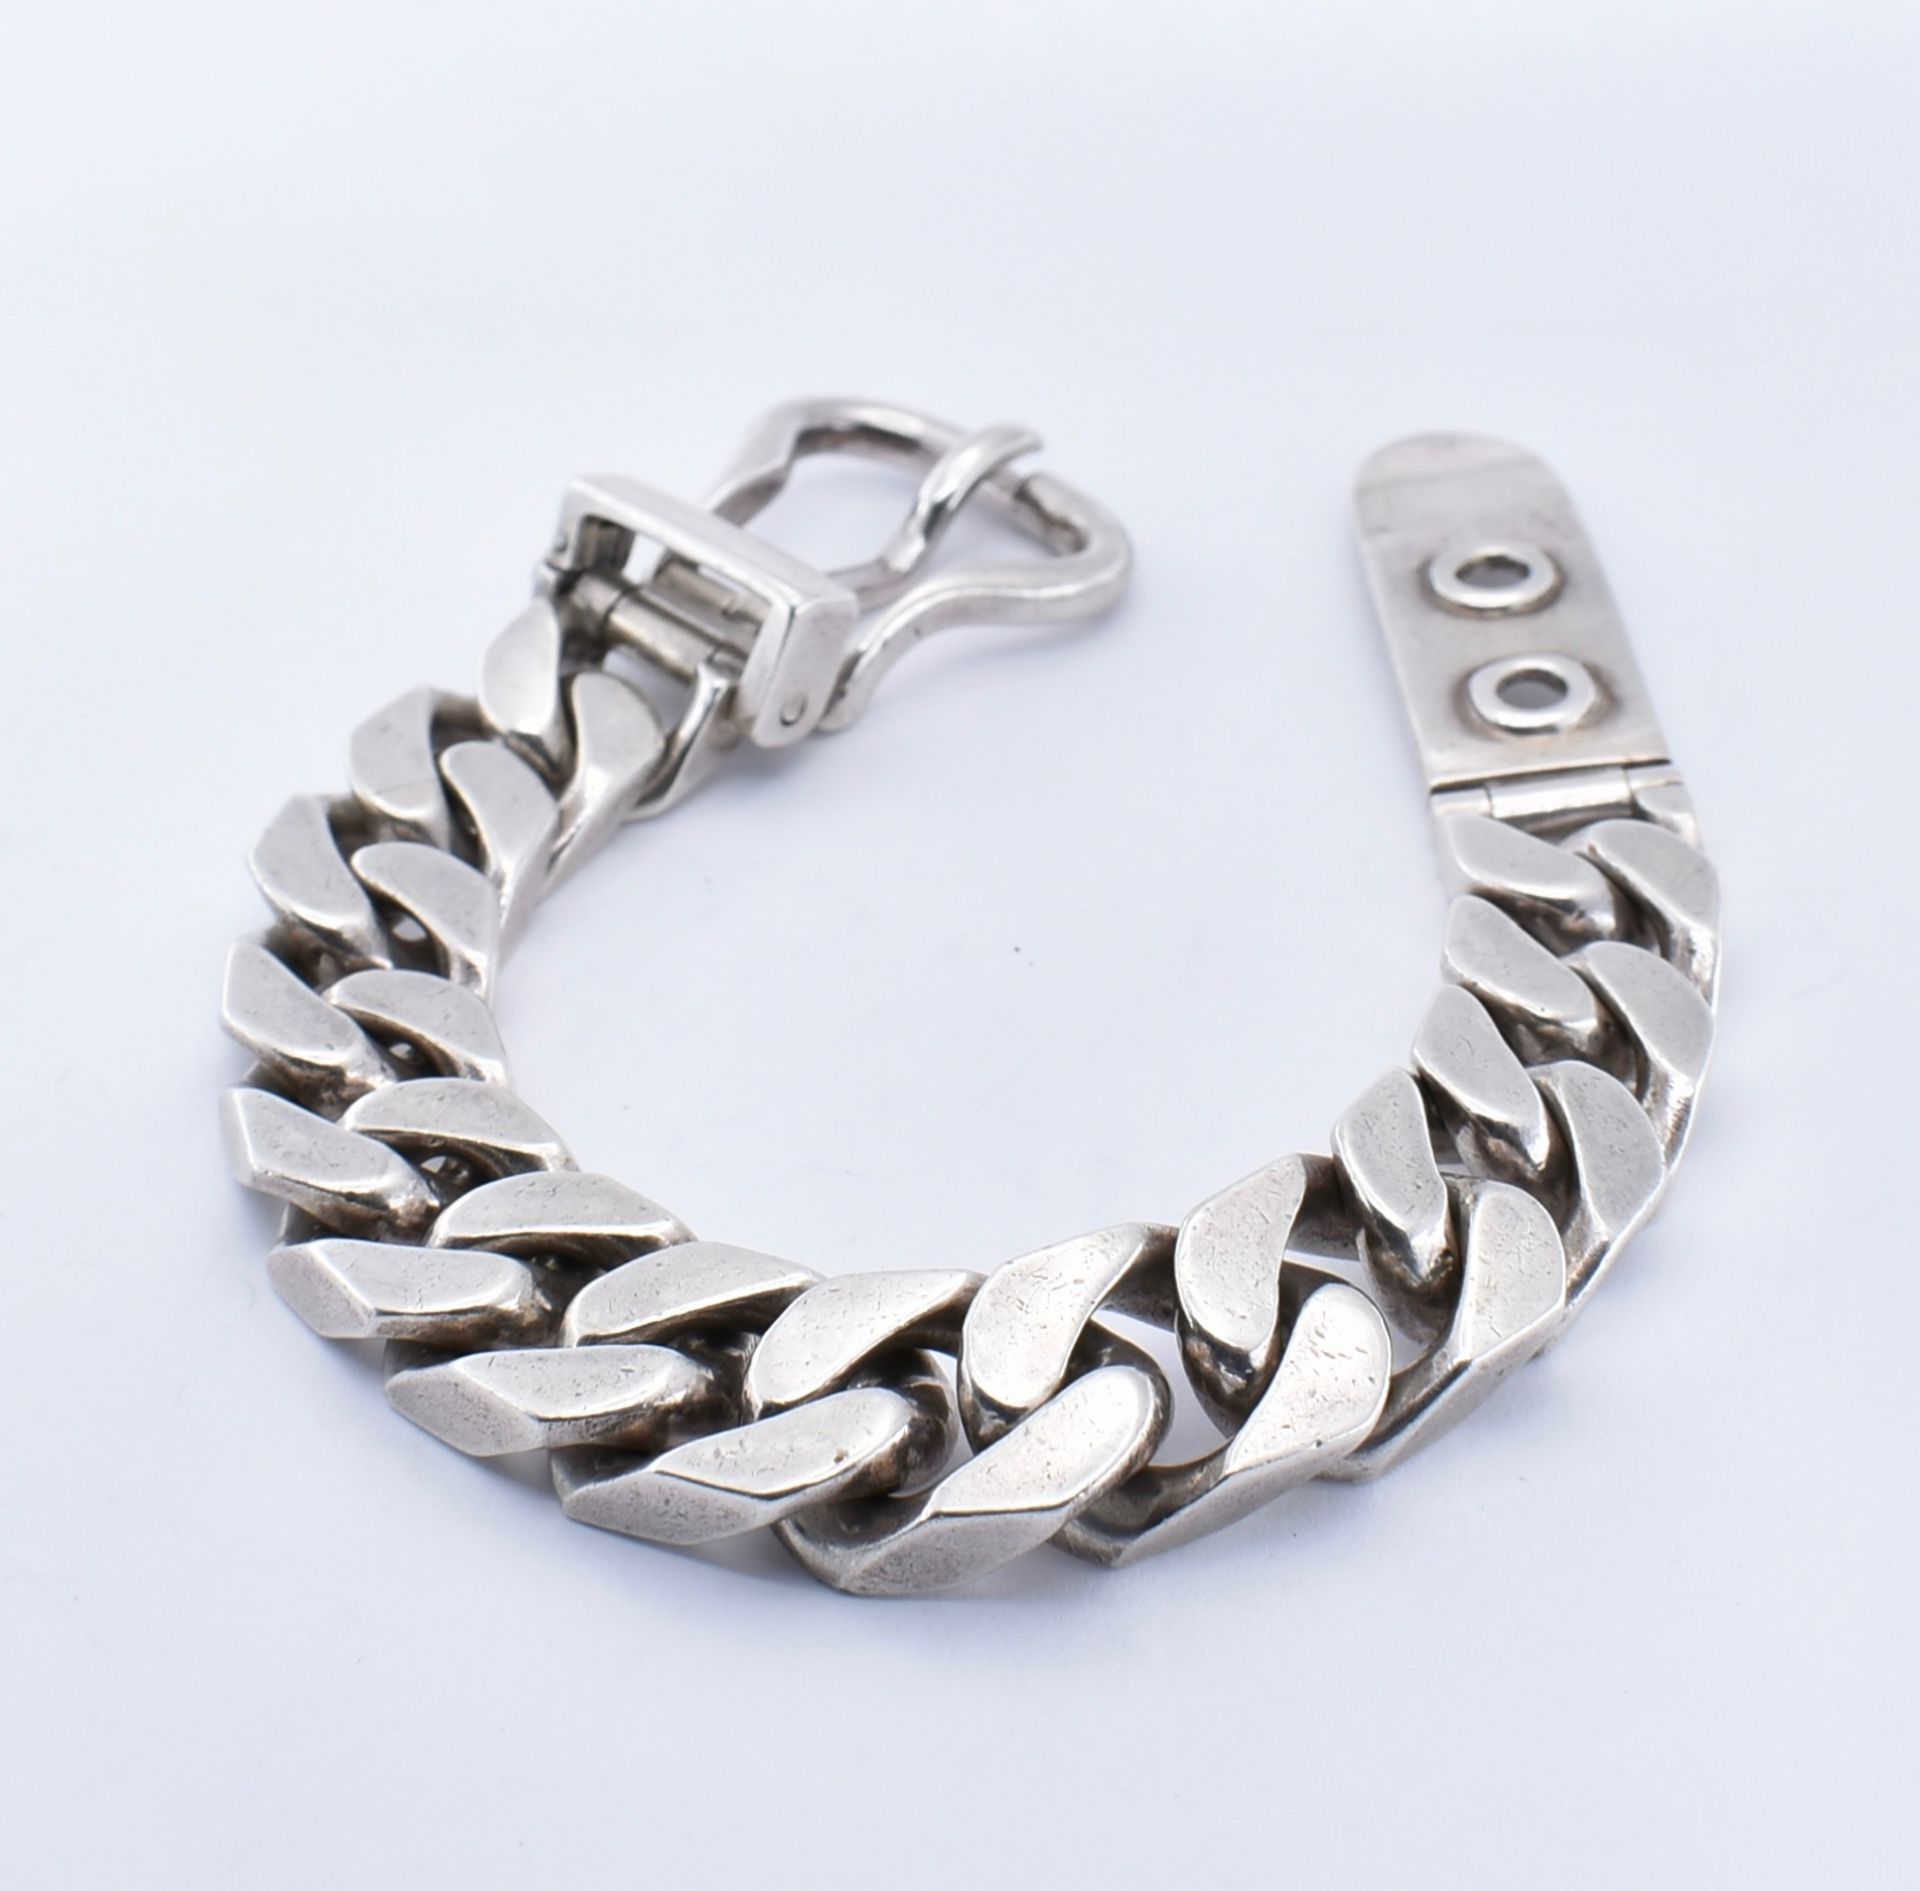 FRENCH SILVER BUCKLE BRACELET - Image 5 of 6